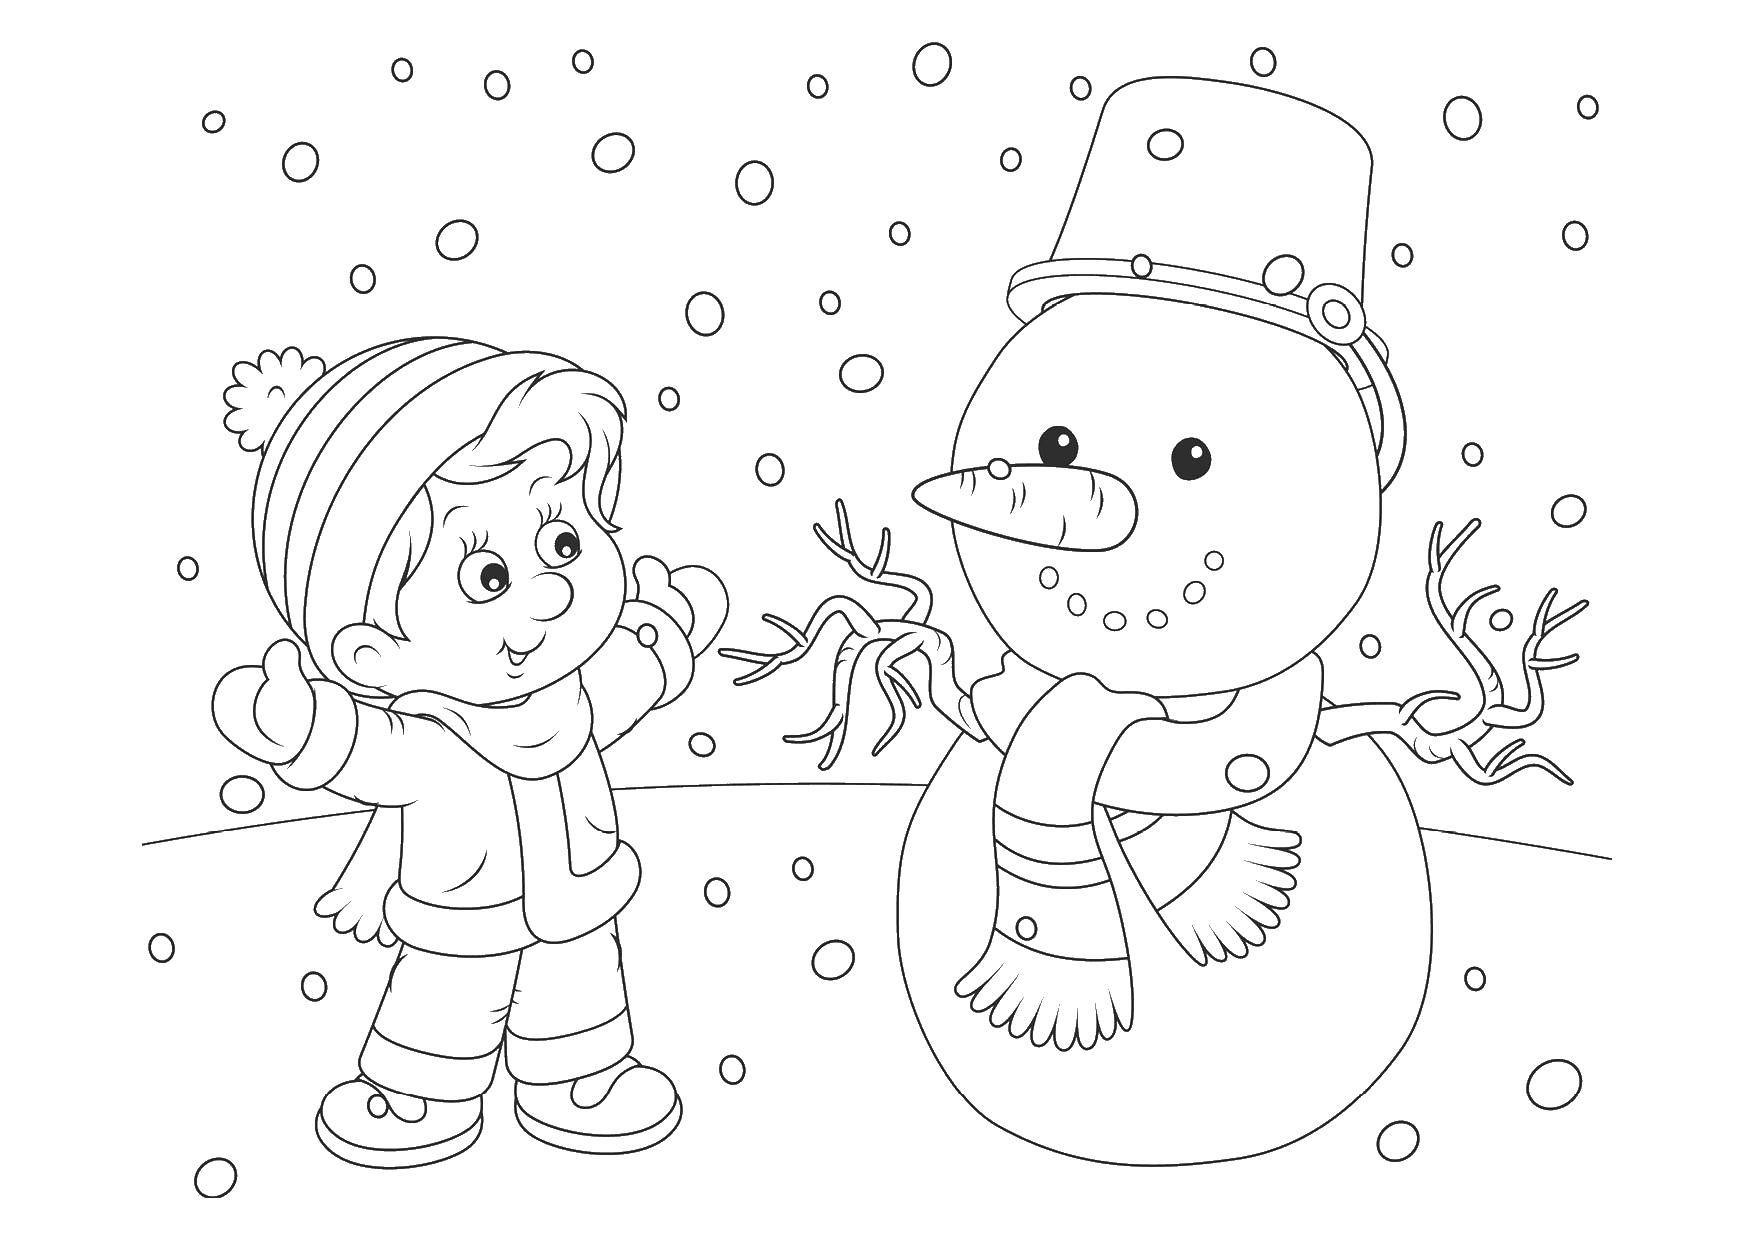 Coloring The boy built the snowman. Category people. Tags:  snowman, children.